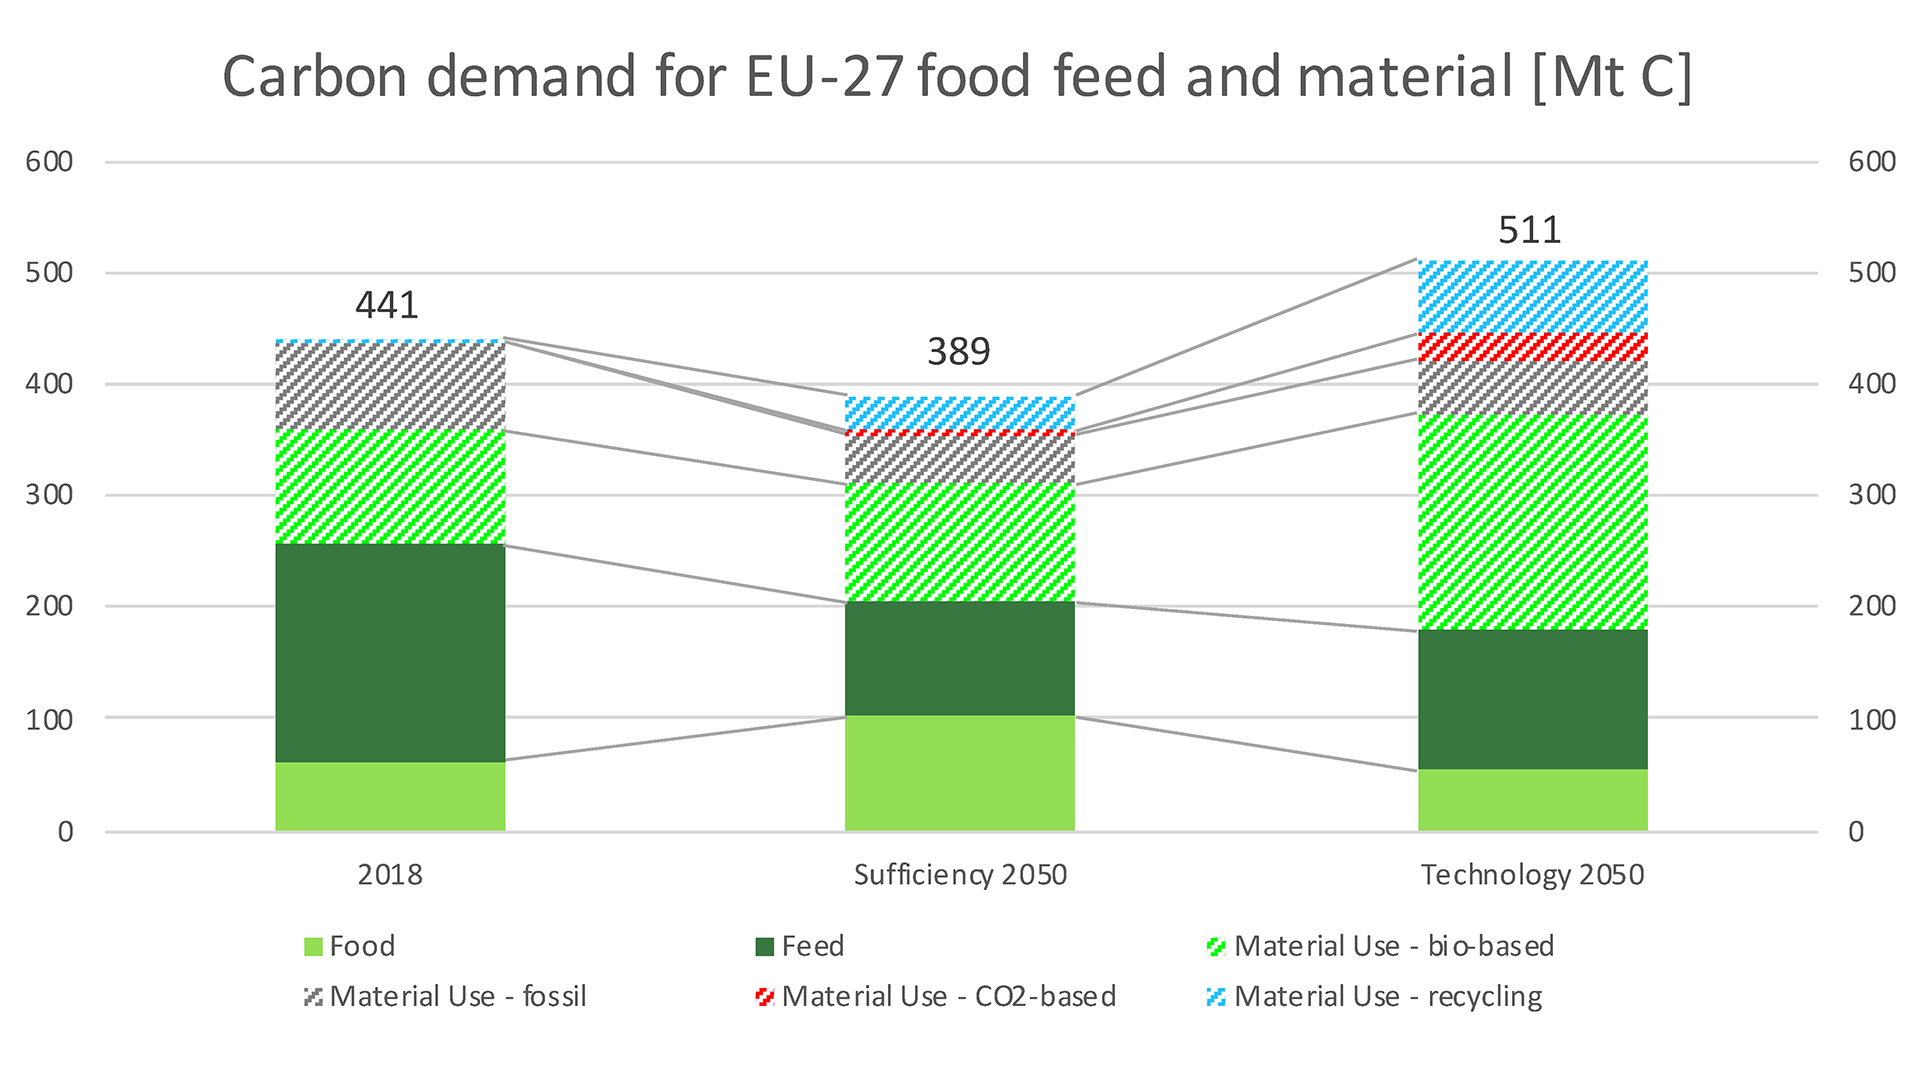 Carbon demand for EU 27 food feed and material / Source: nova-institut GmbH